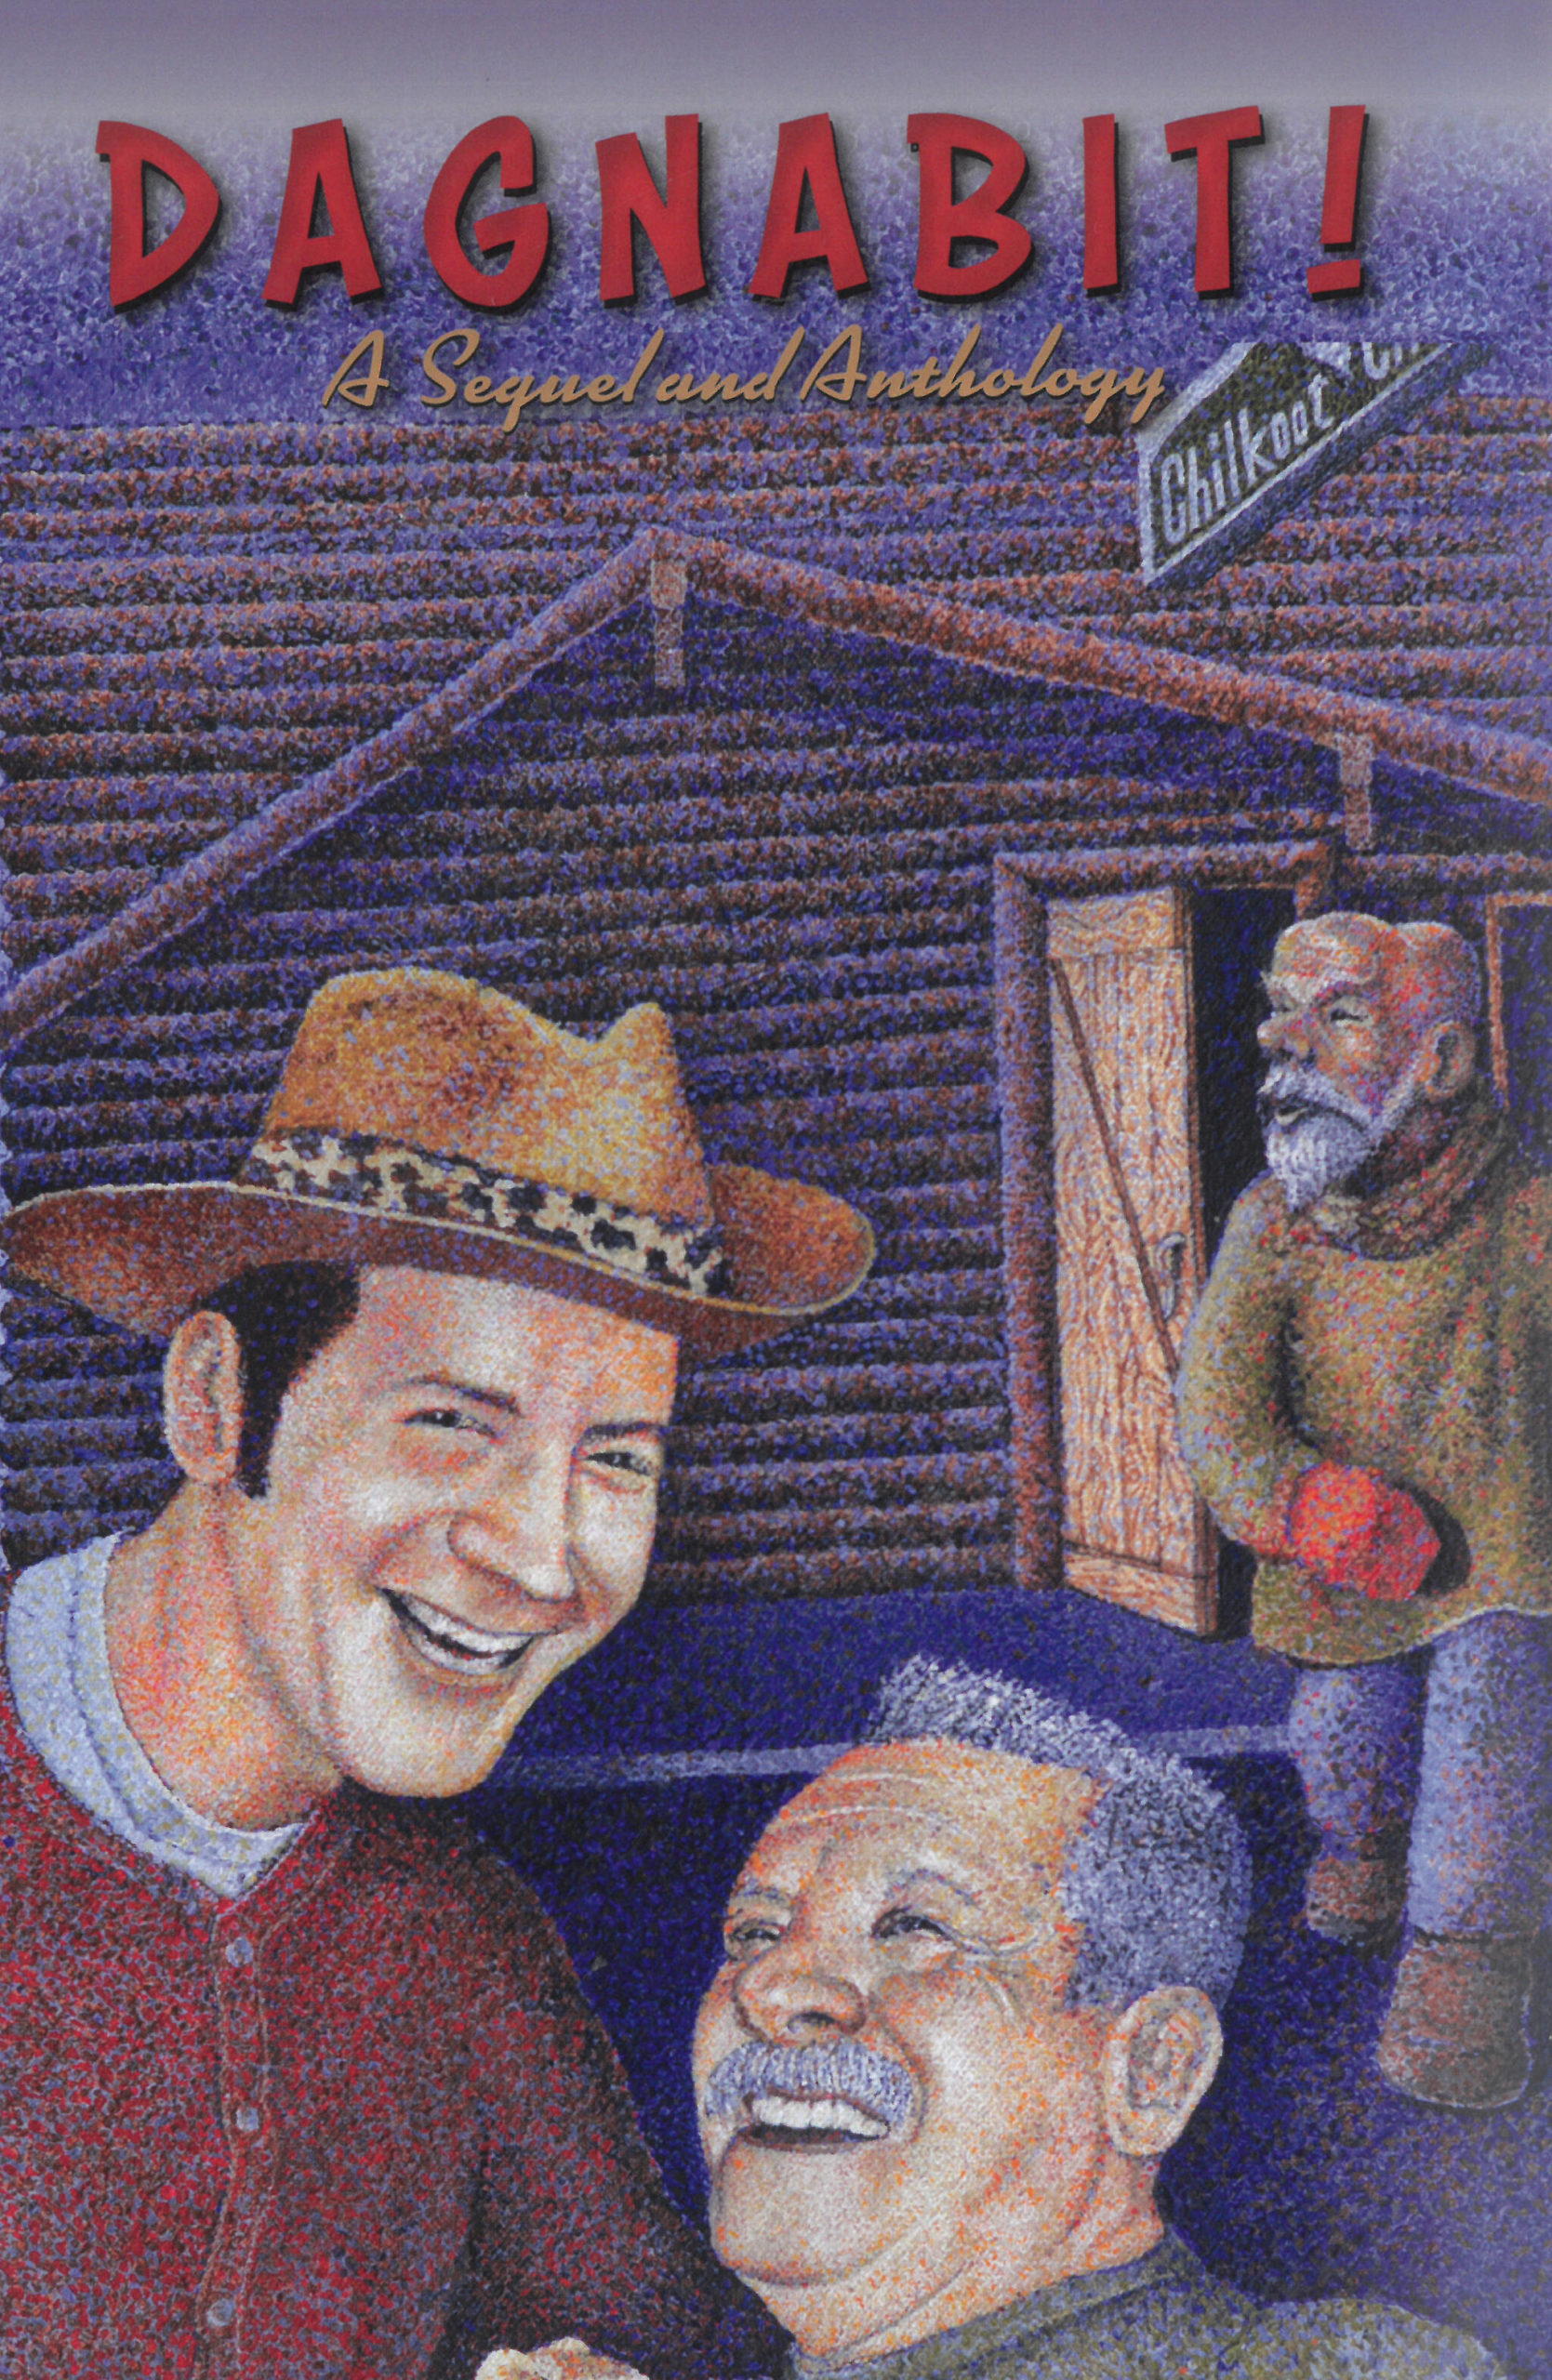 The cover of Mike Gordon’s “Dagnabit” shows Gordon, left, Ruben Gaines, center, and Gaines’ character Chilkoot Charlie, right — the namesake of Chilkoot Charlie’s, the iconic bar Gordon founded in Spenard, Alaska. (Cover design by Carmen Maldonado, Todd Communications)